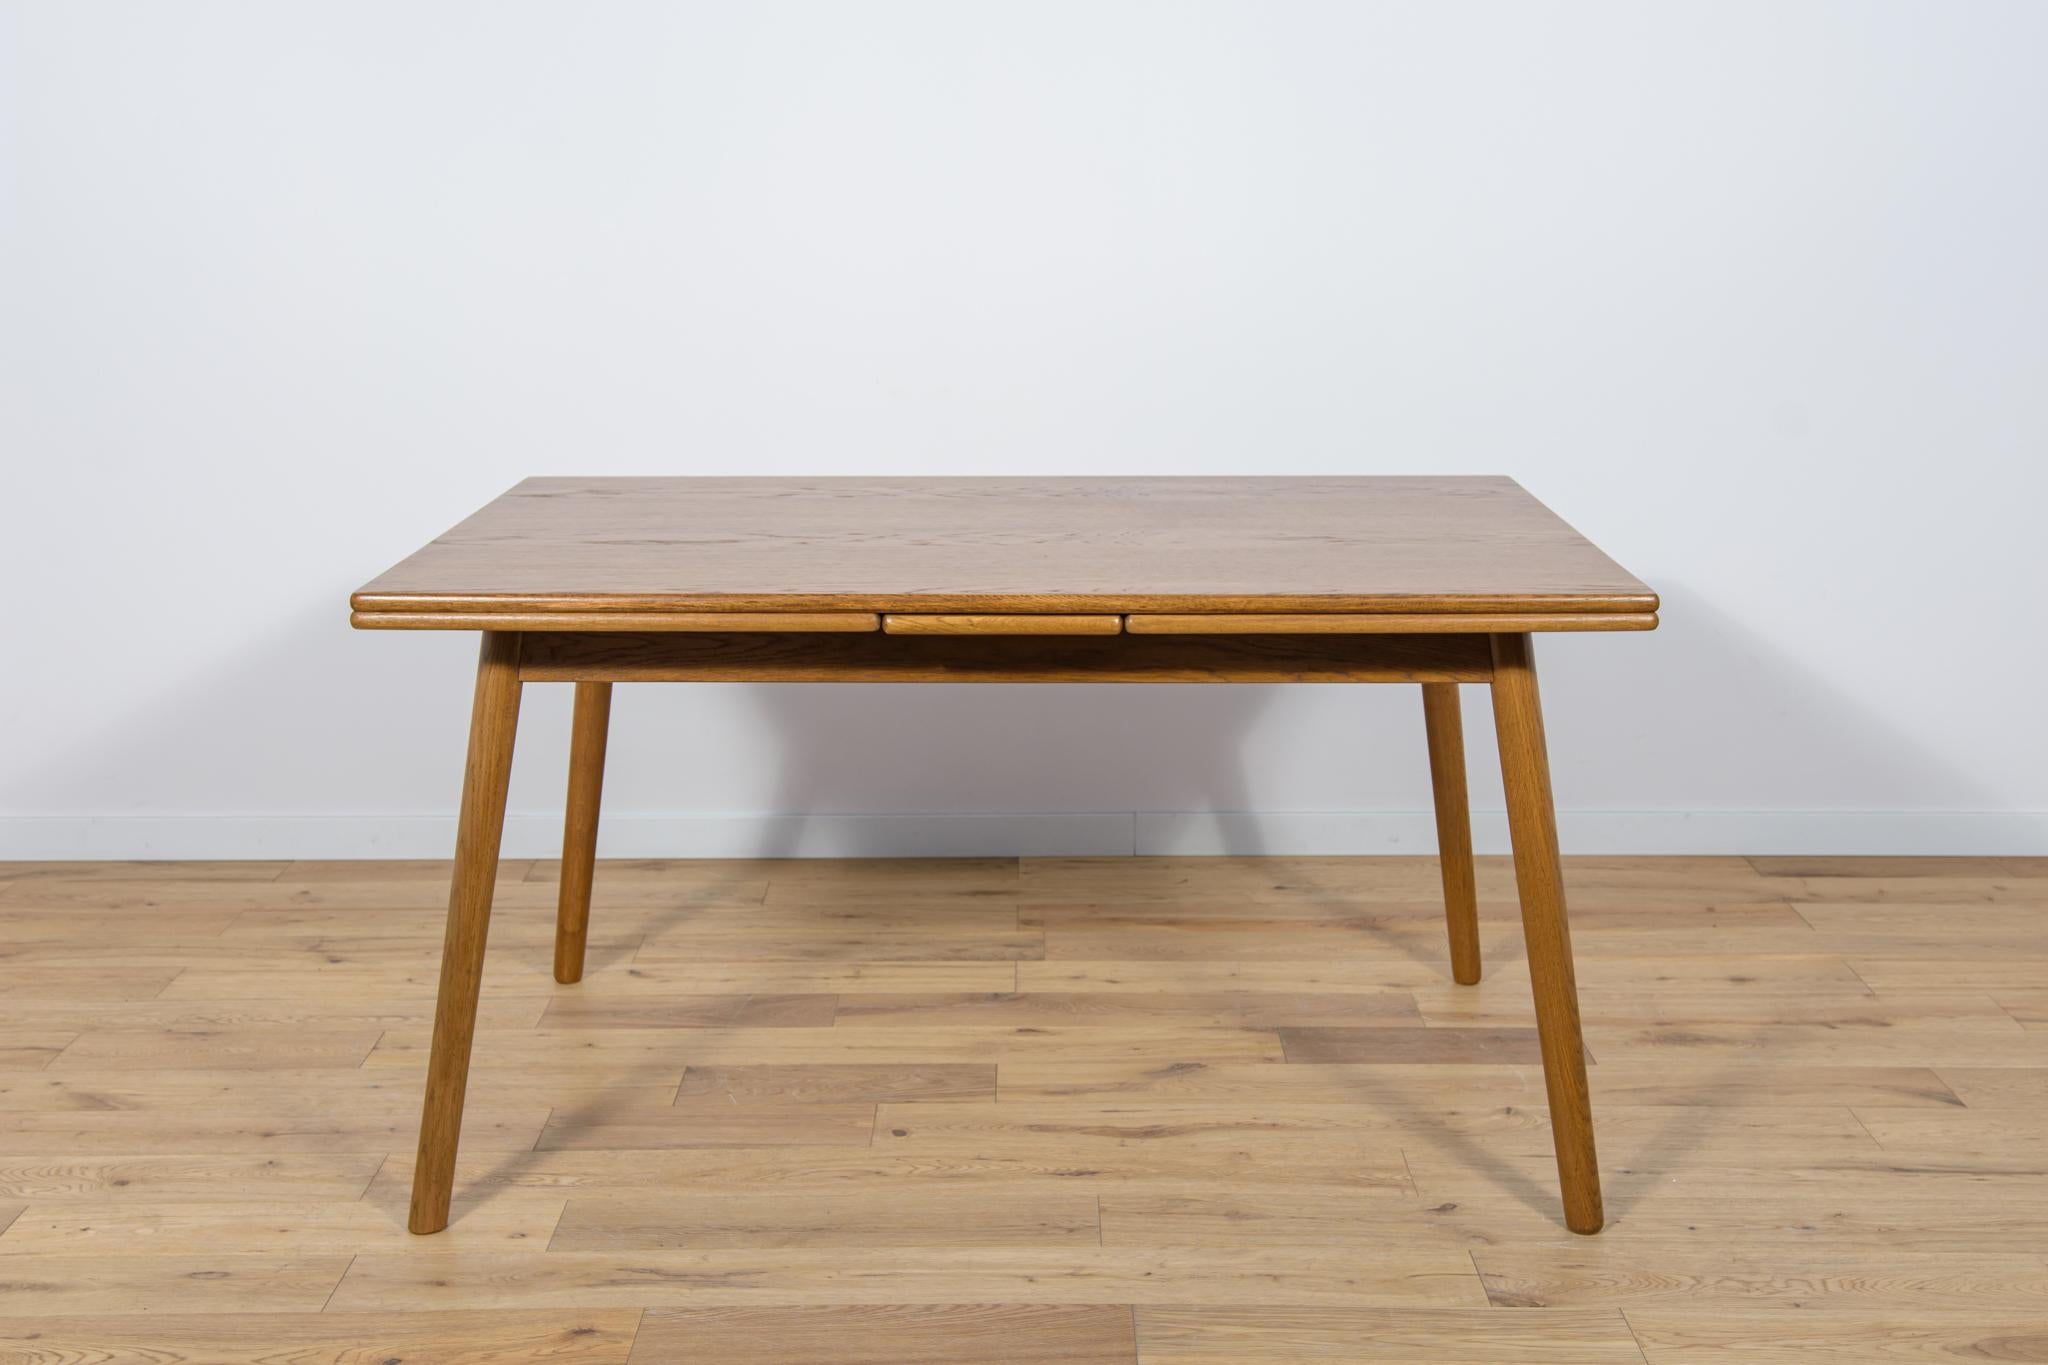 The extendable oak wood table was produced in Denmark in the 1960s. The unique character of the table was given by placing legs at an angle. The furniture has been completely renovated, cleaned of the old coating, stained with oak stain, finished